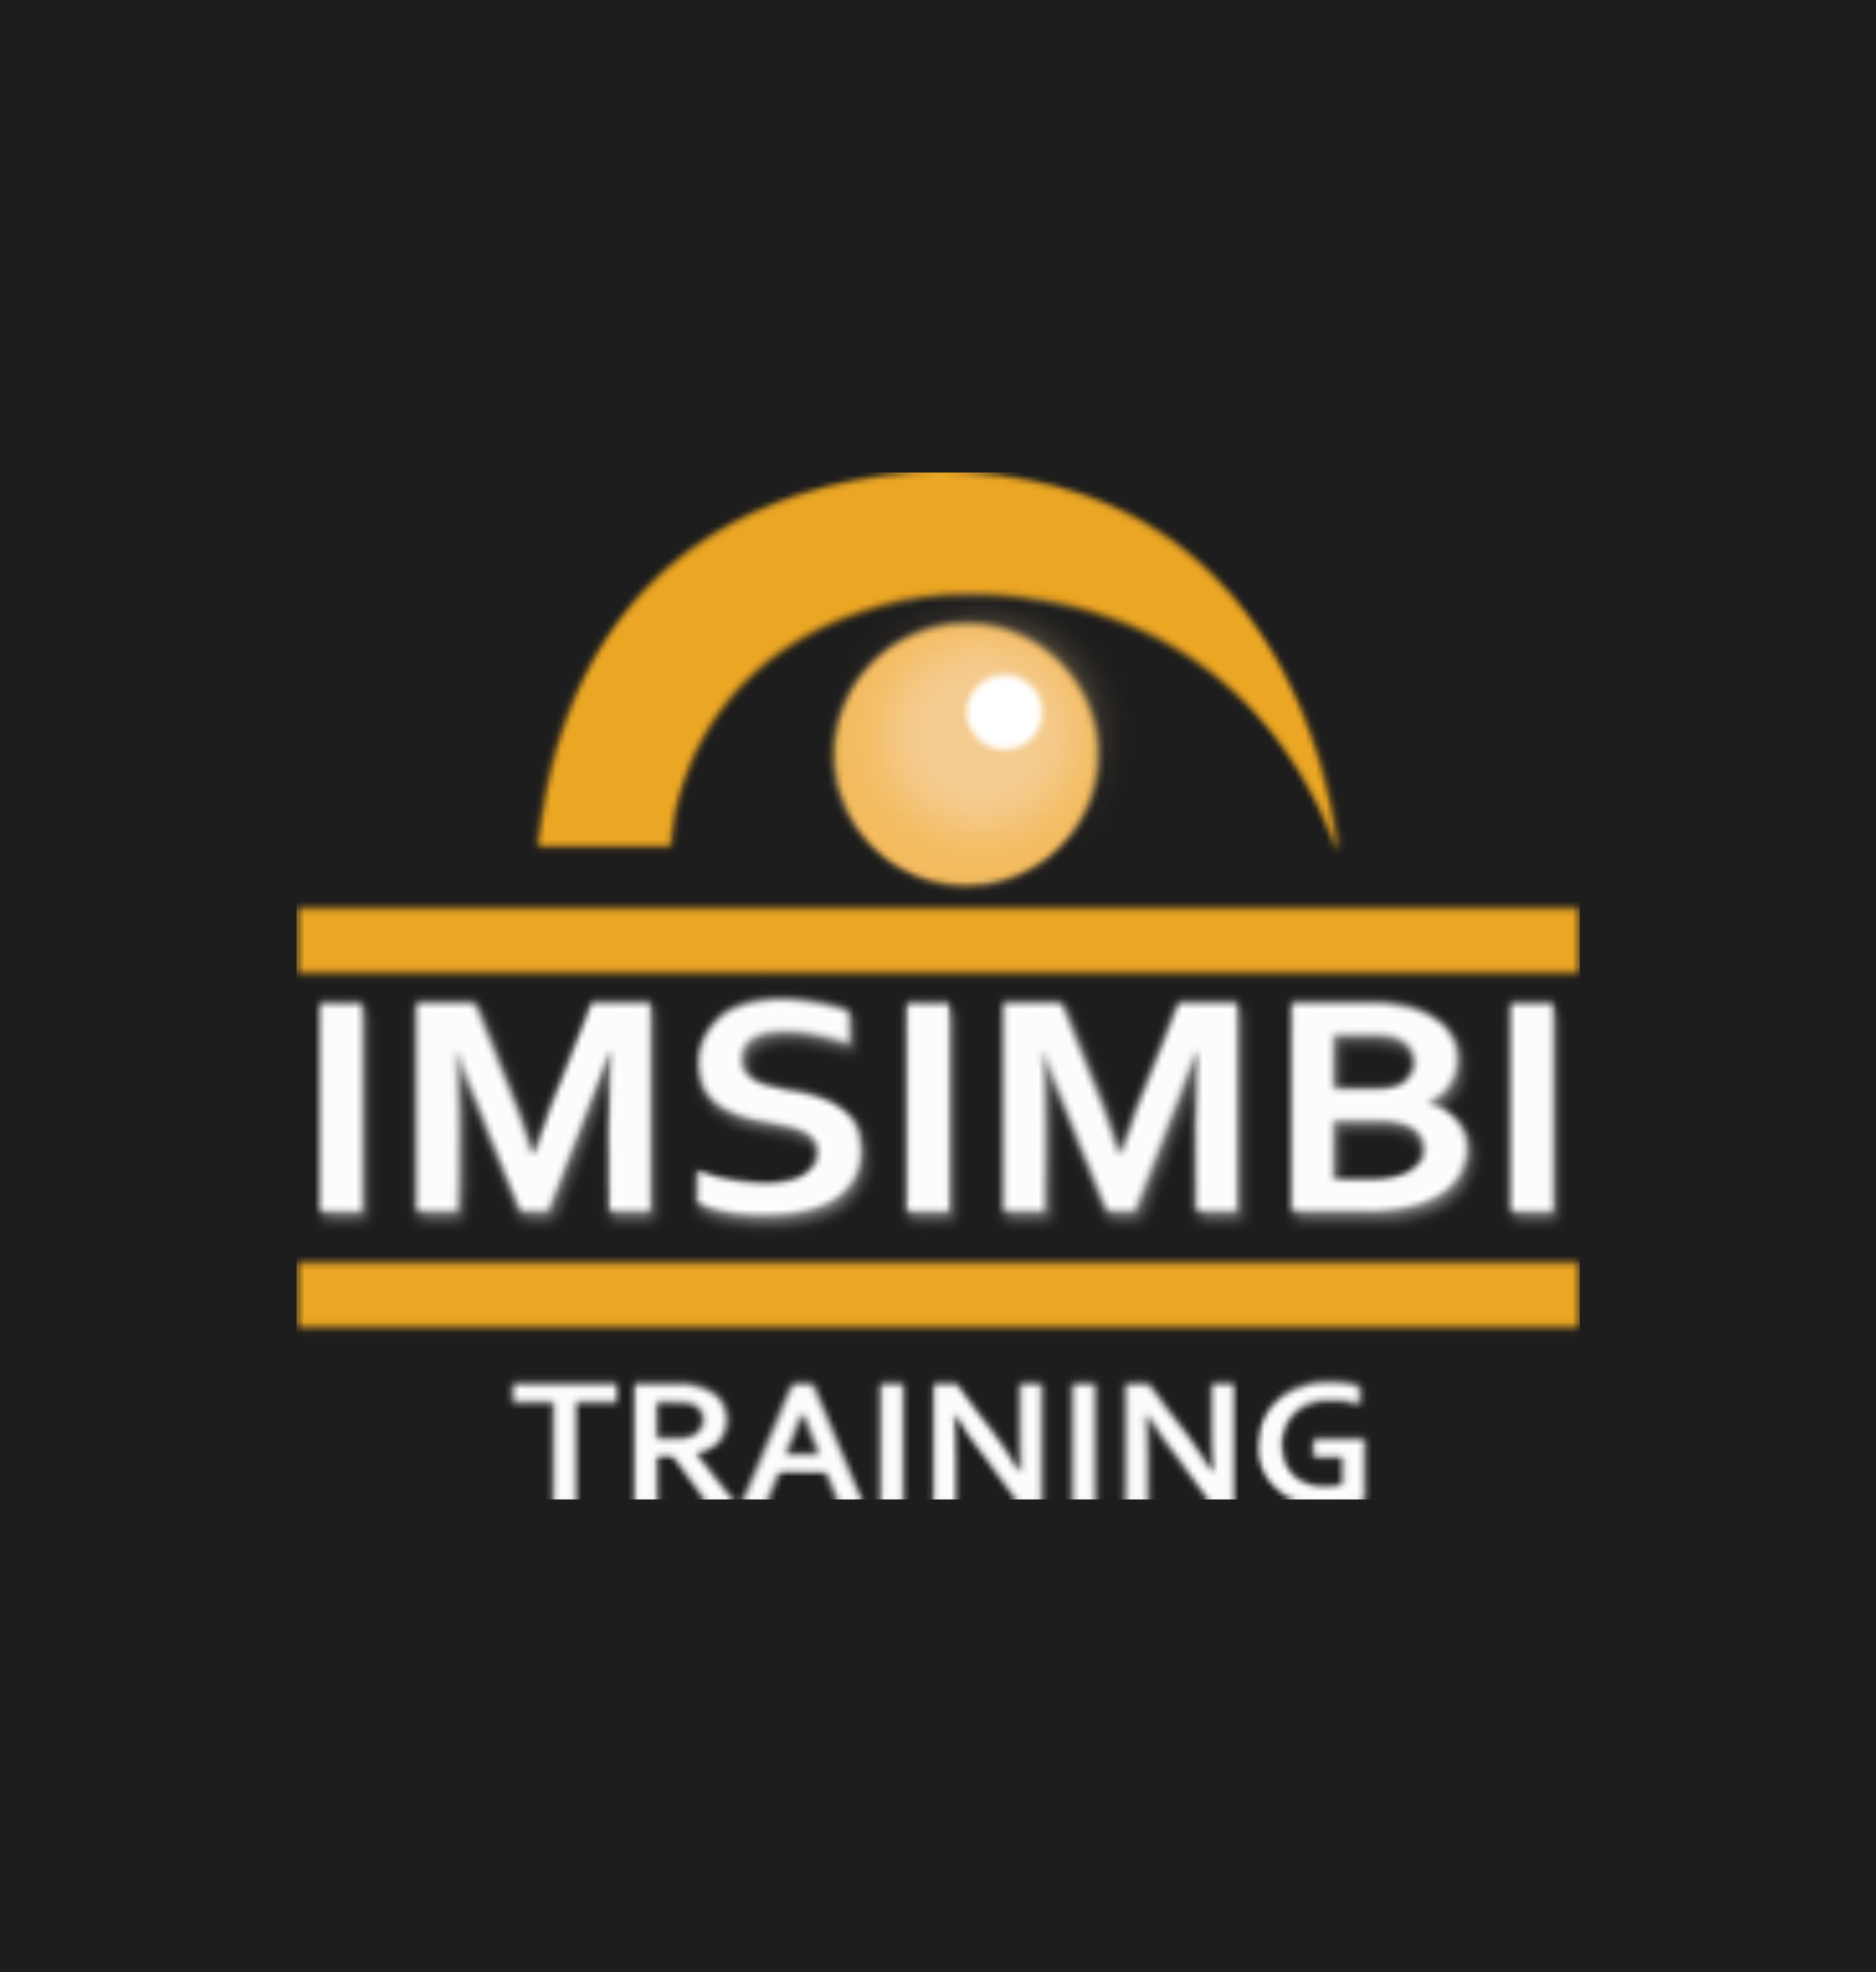 Courses and Training offered by Imsimbi Training on Job Mail